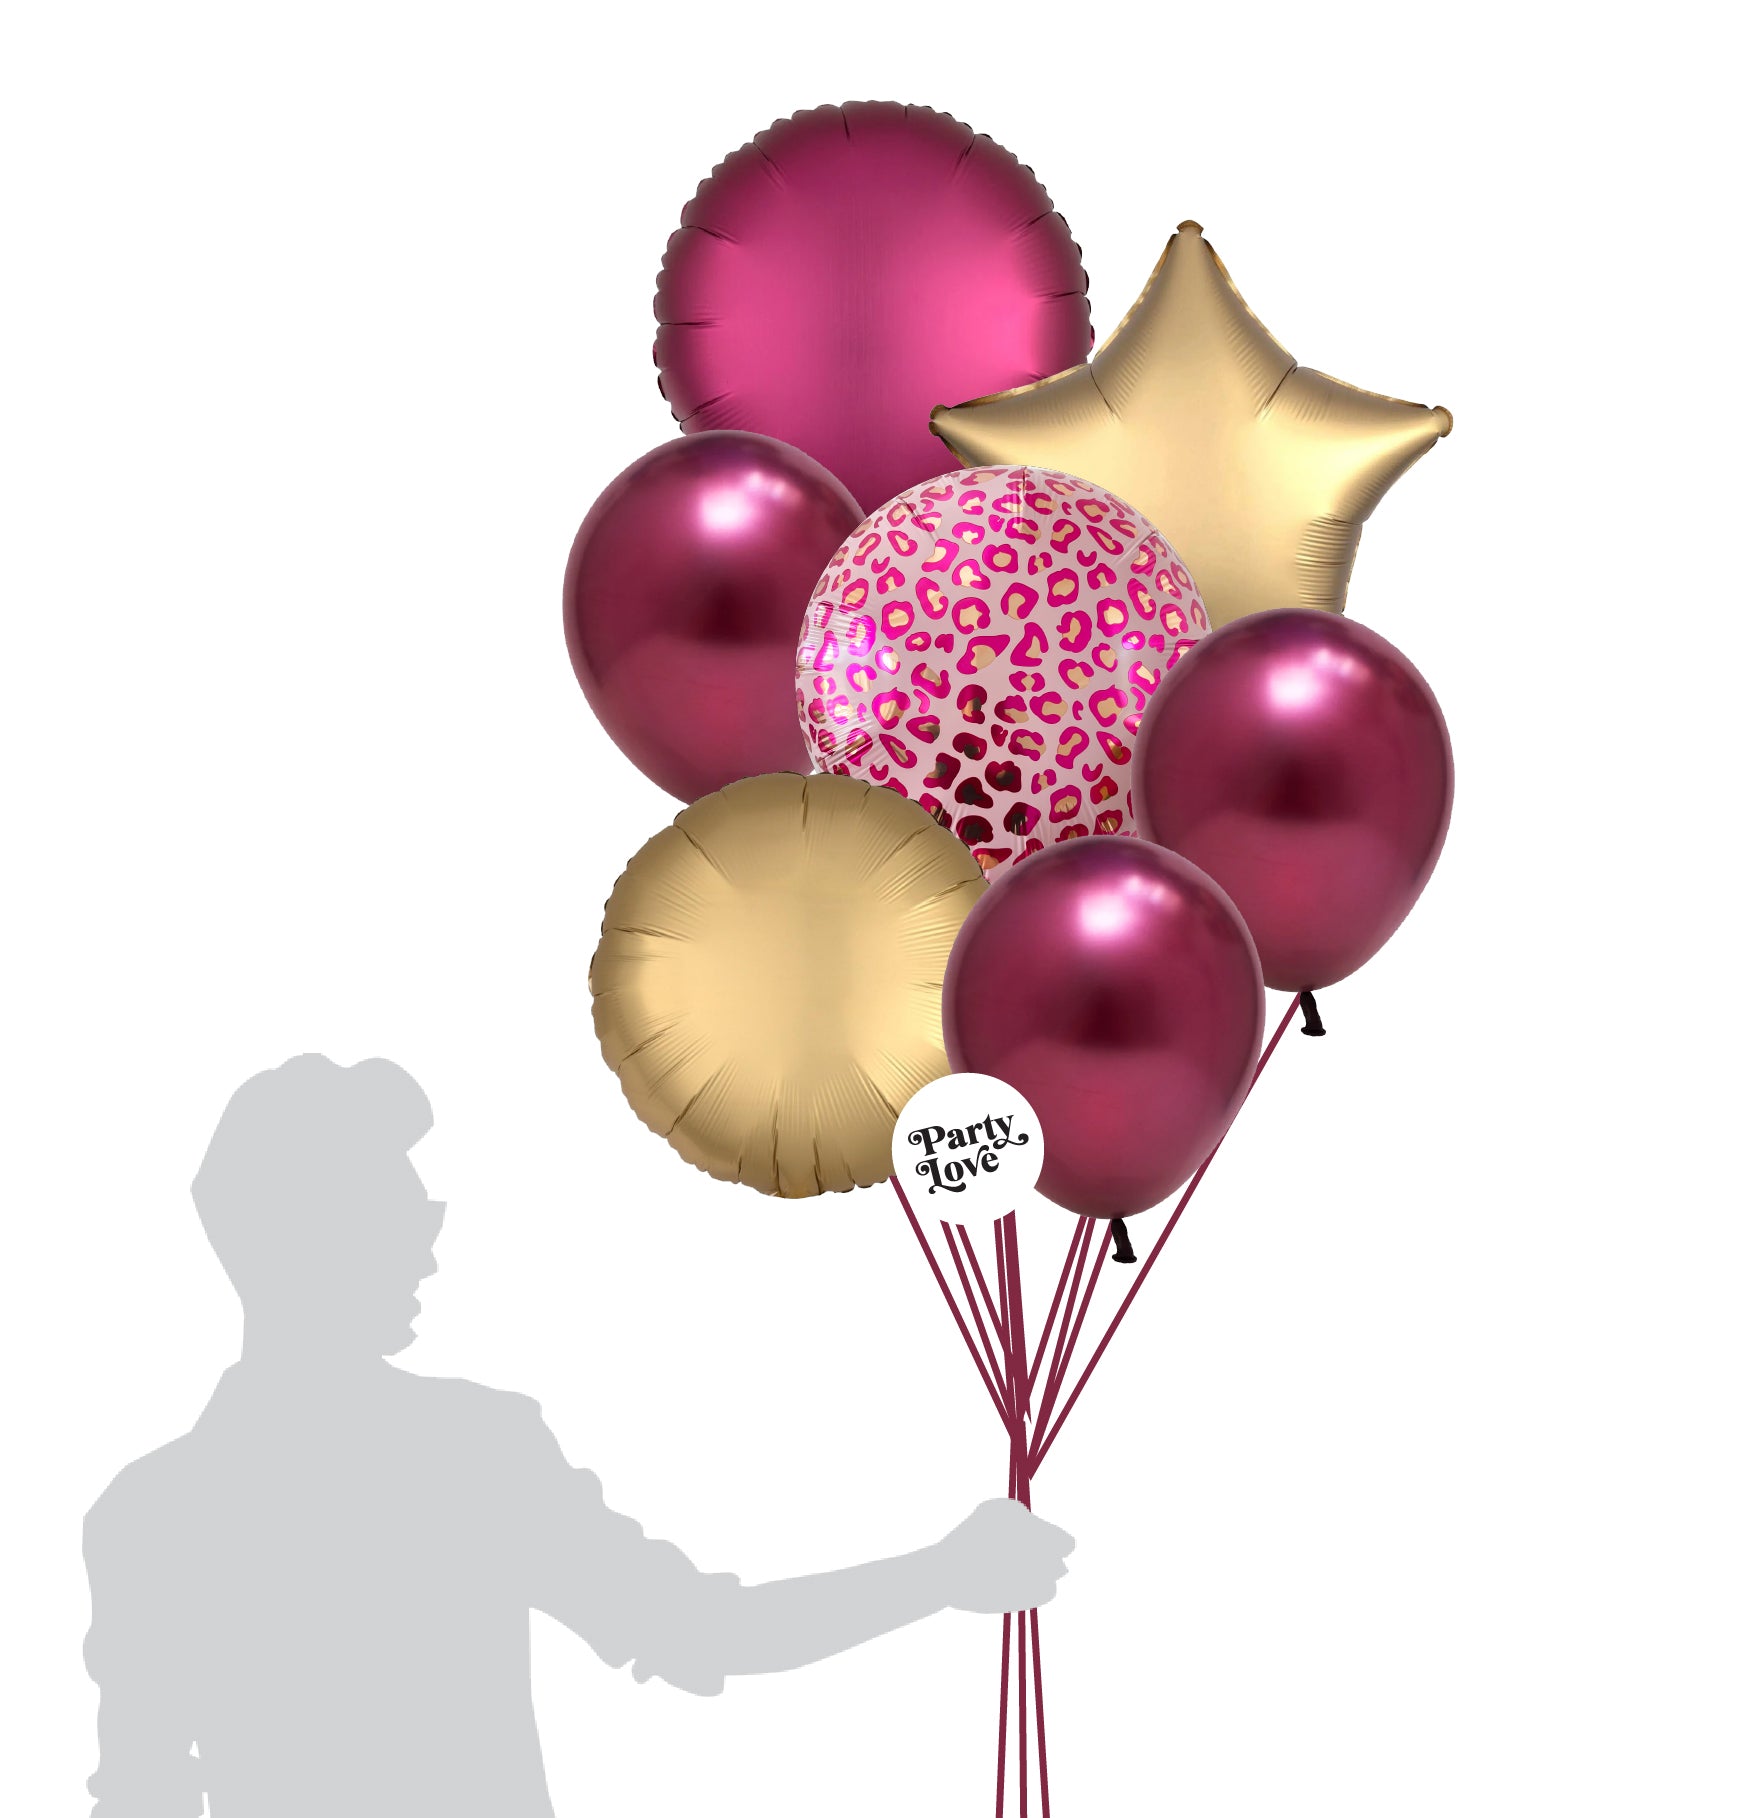 Burgundy, Pink and Gold Balloon Bouquet Party Love